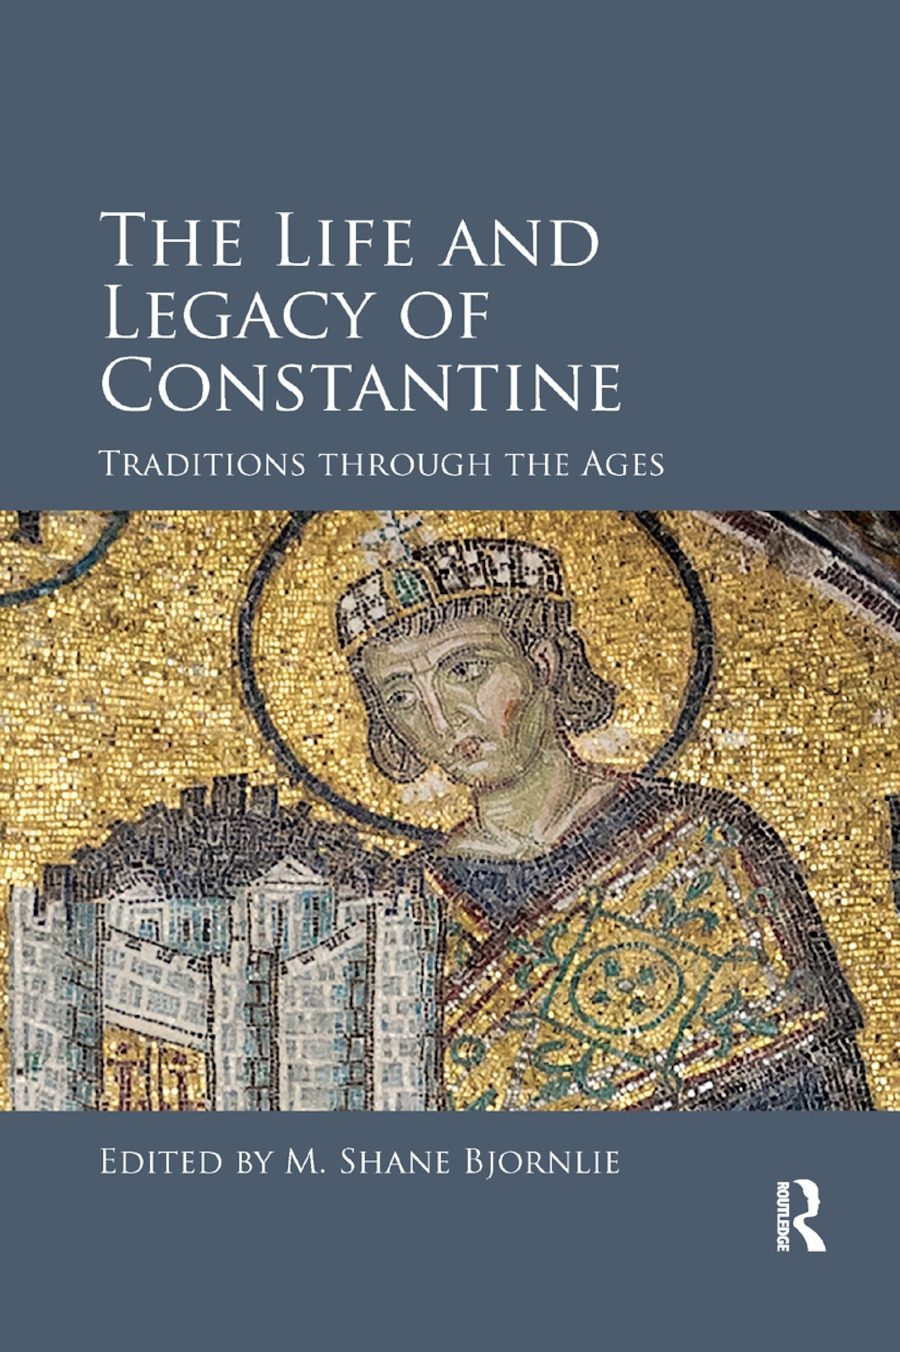 The Life and Legacy of Constantine: Traditions Through the Ages